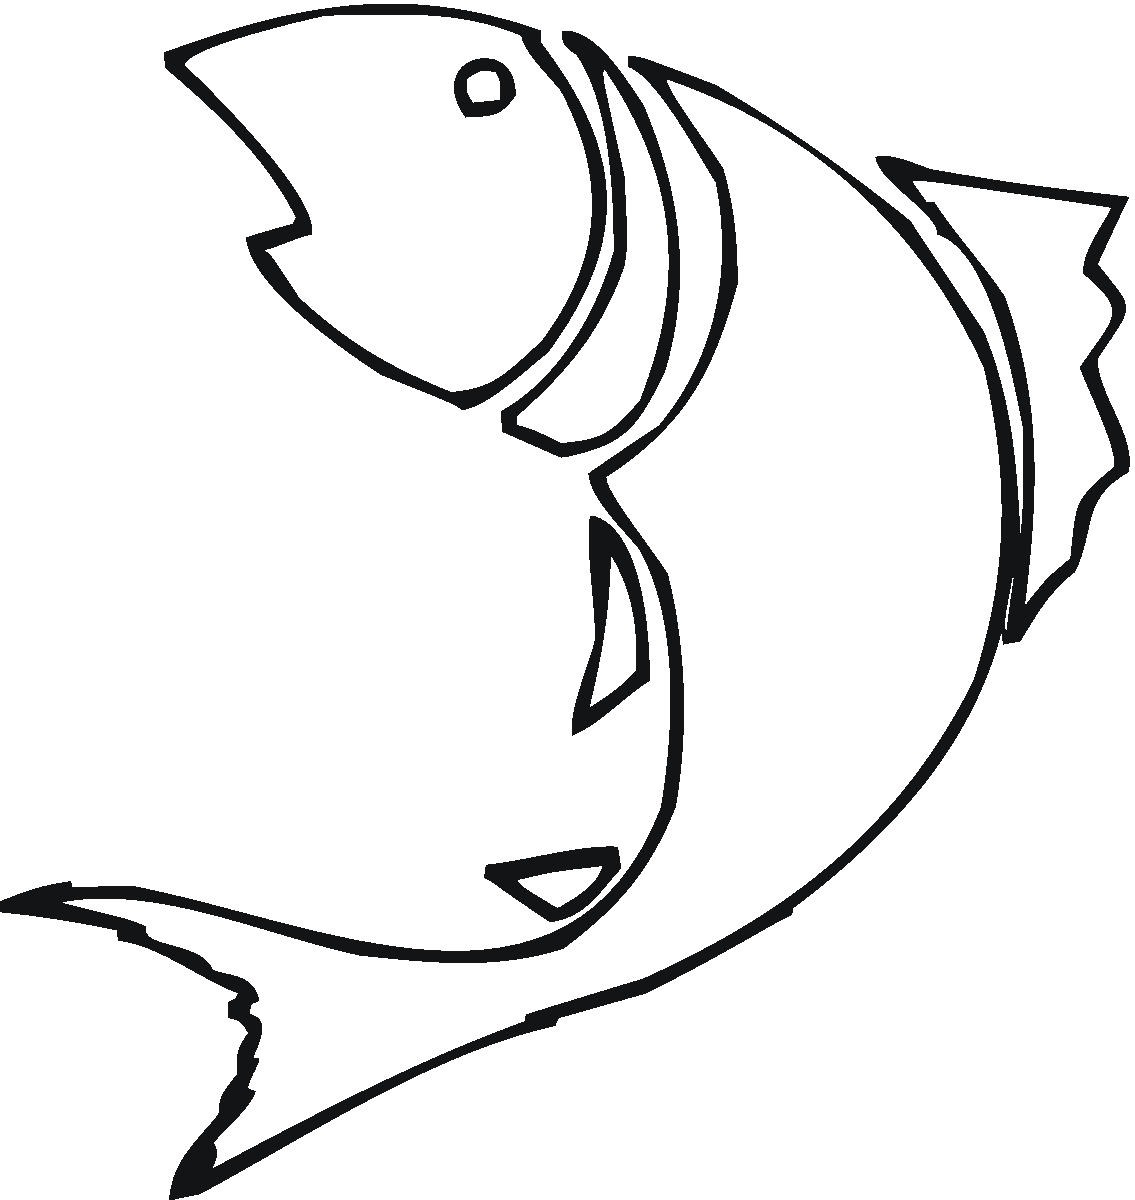 Bass fish outline clip art free clipart images